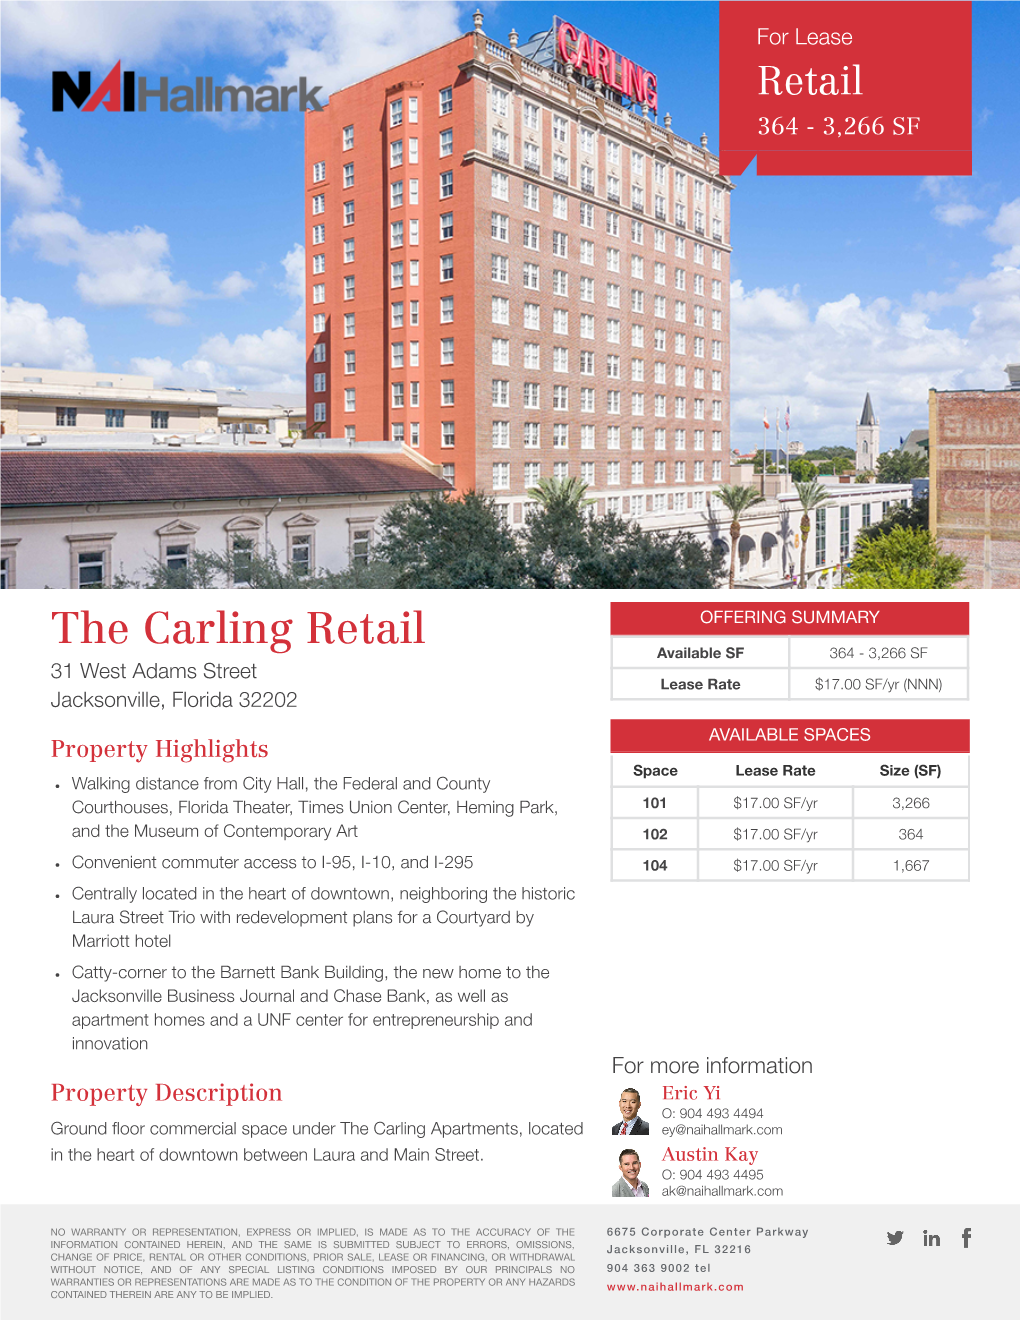 The Carling Retail